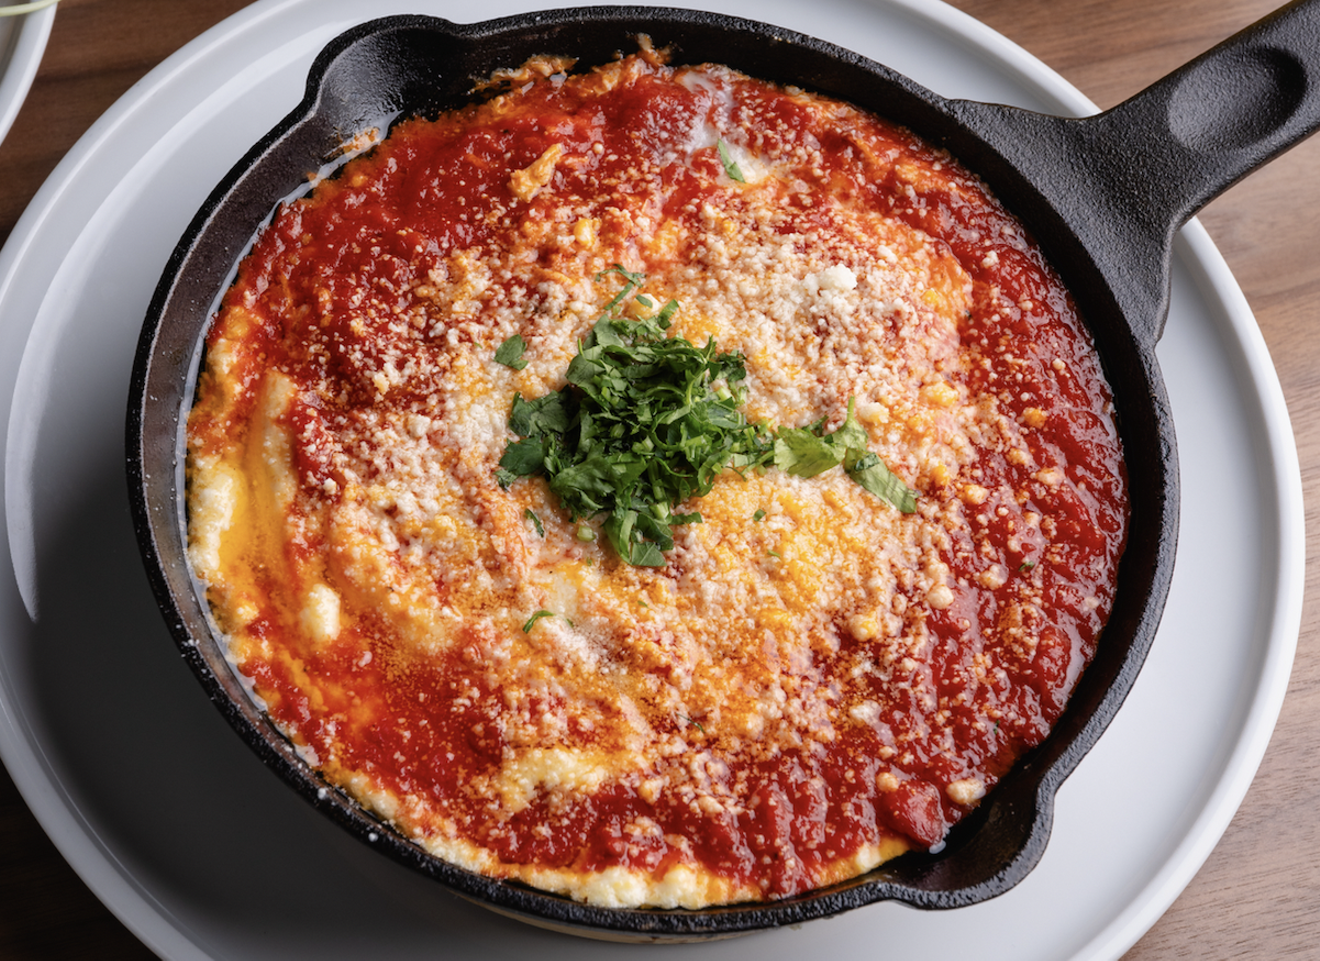 Bar Luca serves a robust breakfast menu, with options like the "Eggs in Purgatory," made with two poached eggs served on a bed of spicy red sauce and creamy polenta and served with toast.